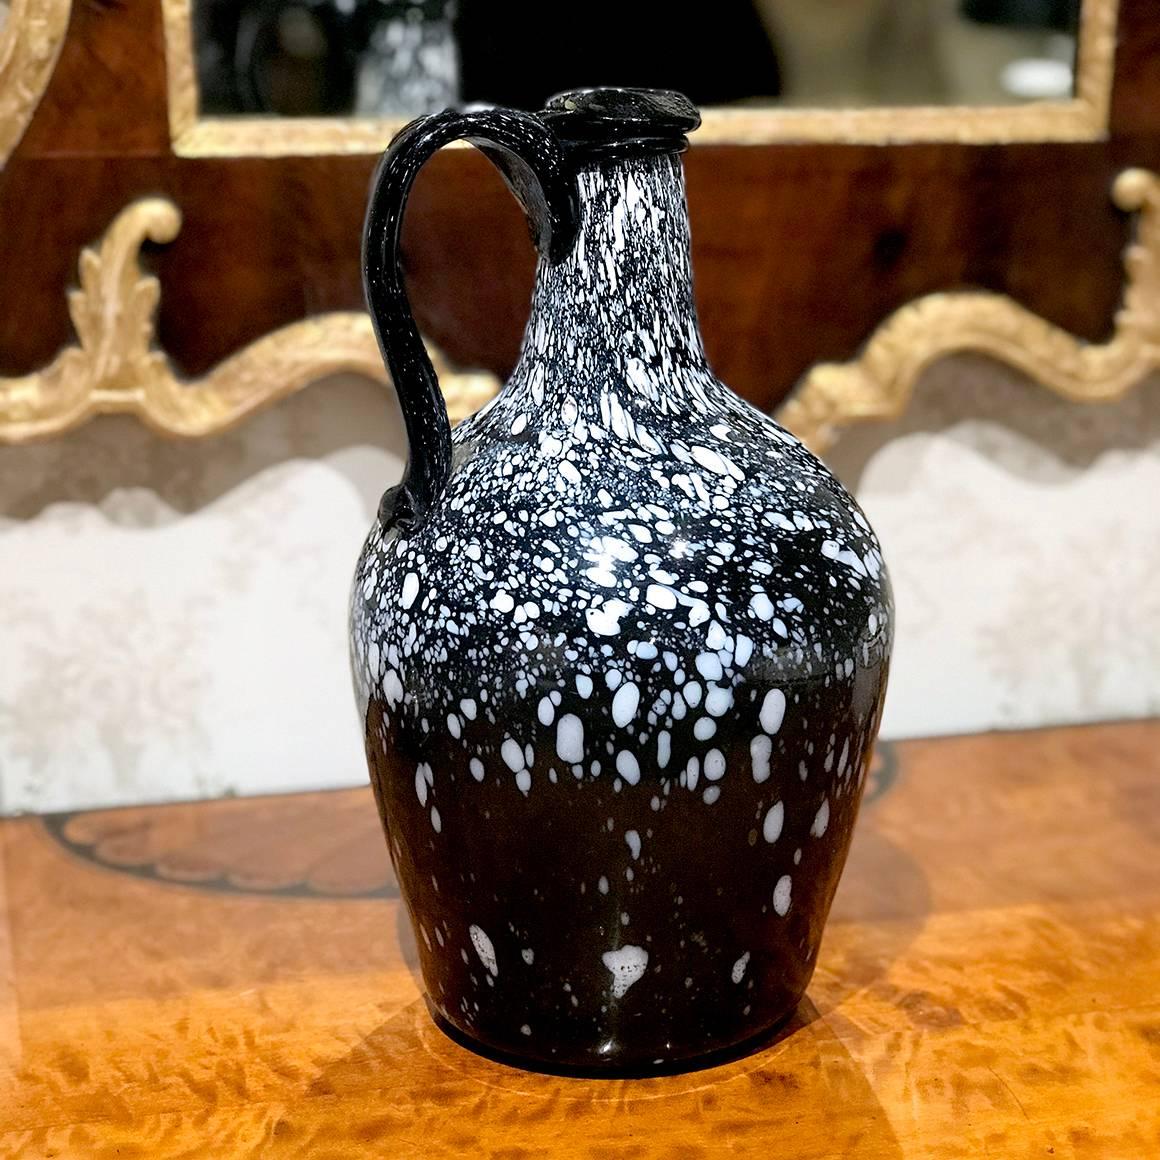 Nailsea Glassworks, in Somerset, England, was known for its distinctively colored and patterned pieces, which they produced from the late 18th century until the mid-19th century. This narrow-necked, handled glass jug is made from striking mottled